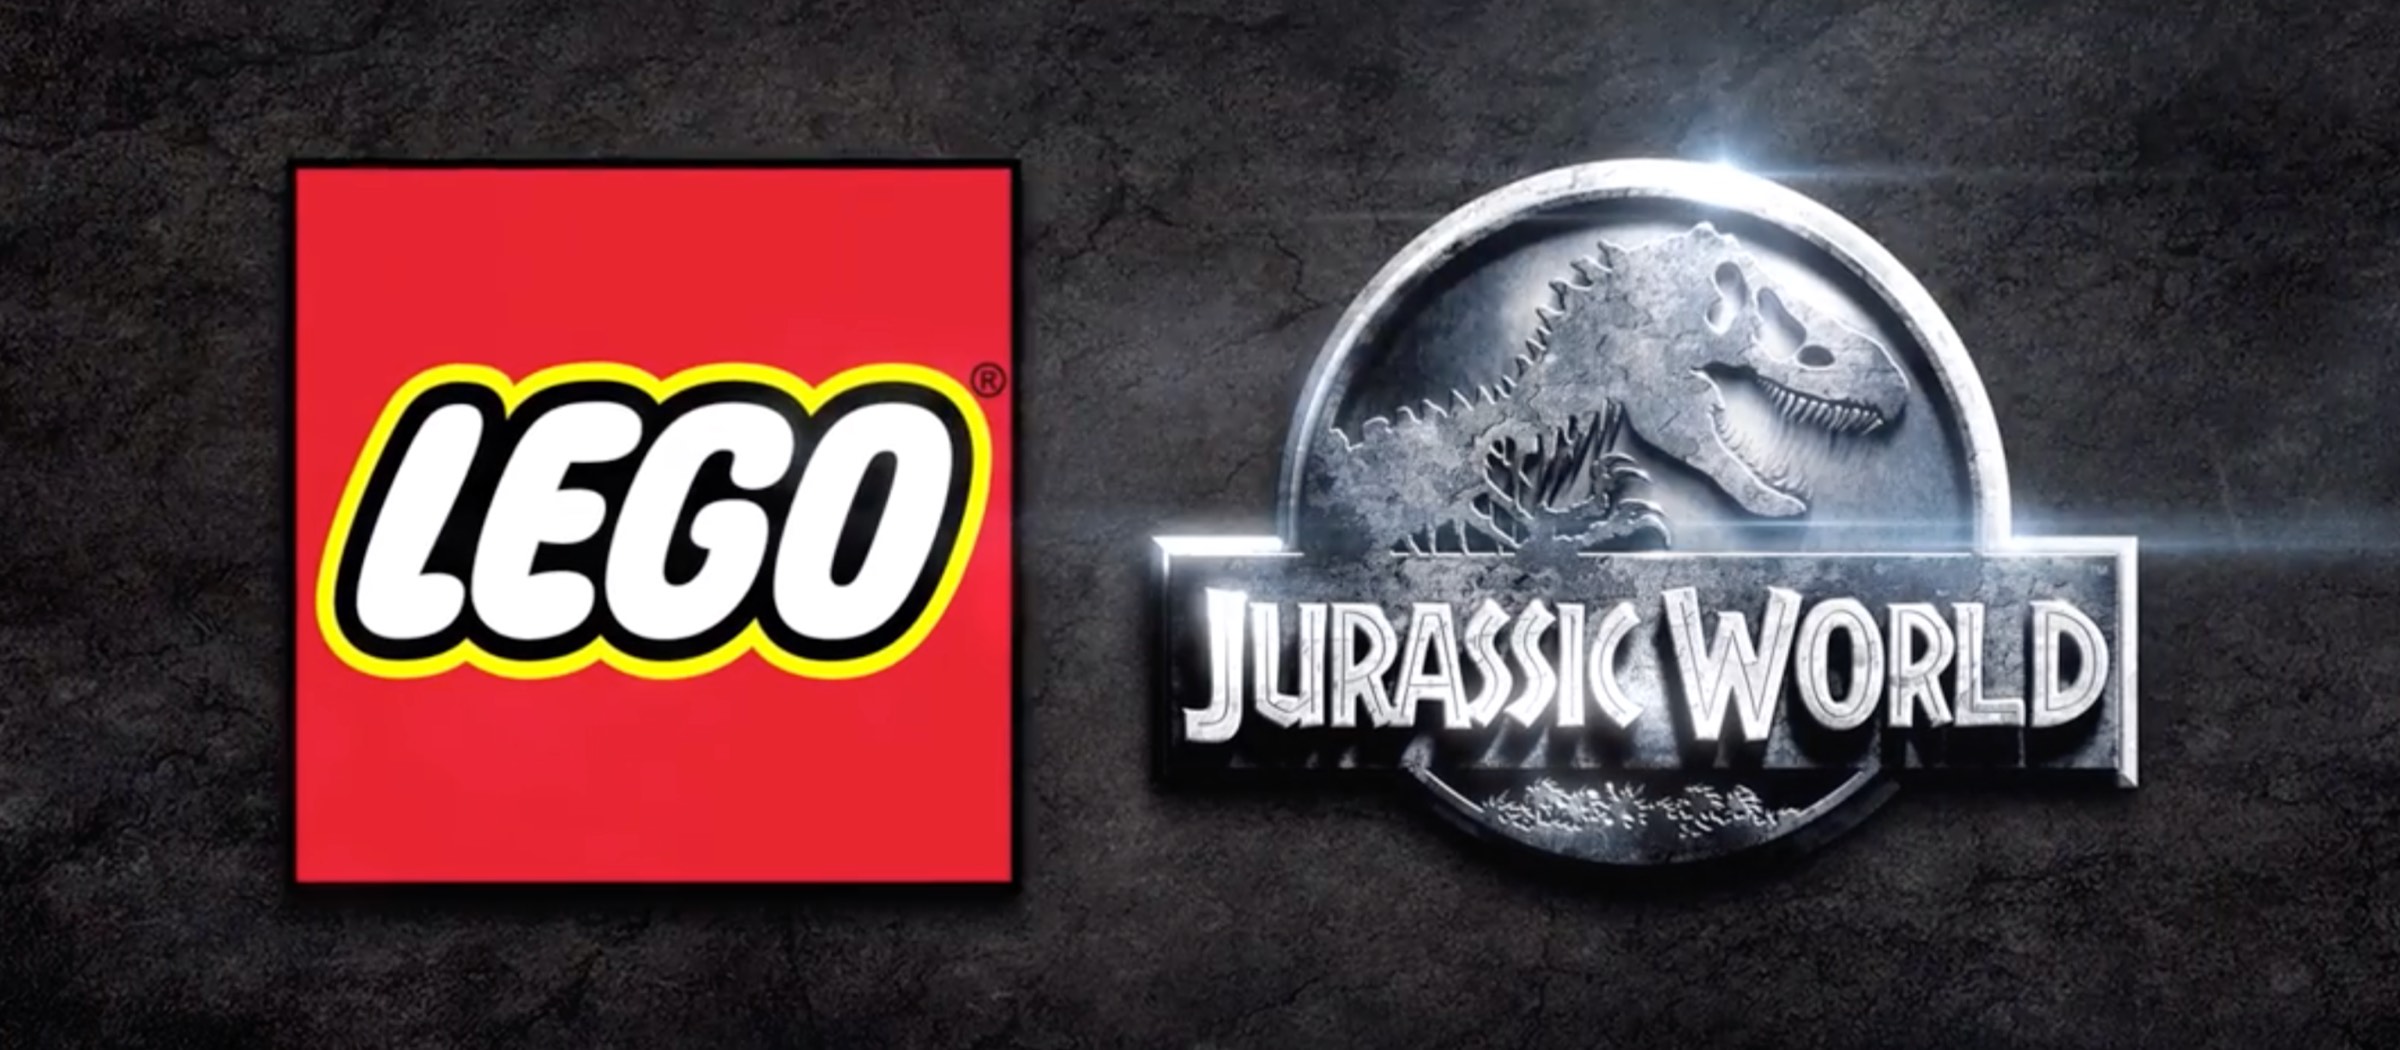 Drawing ALL the Jurassic logos in one! | Jurassic Park/World Speed Drawing  - YouTube